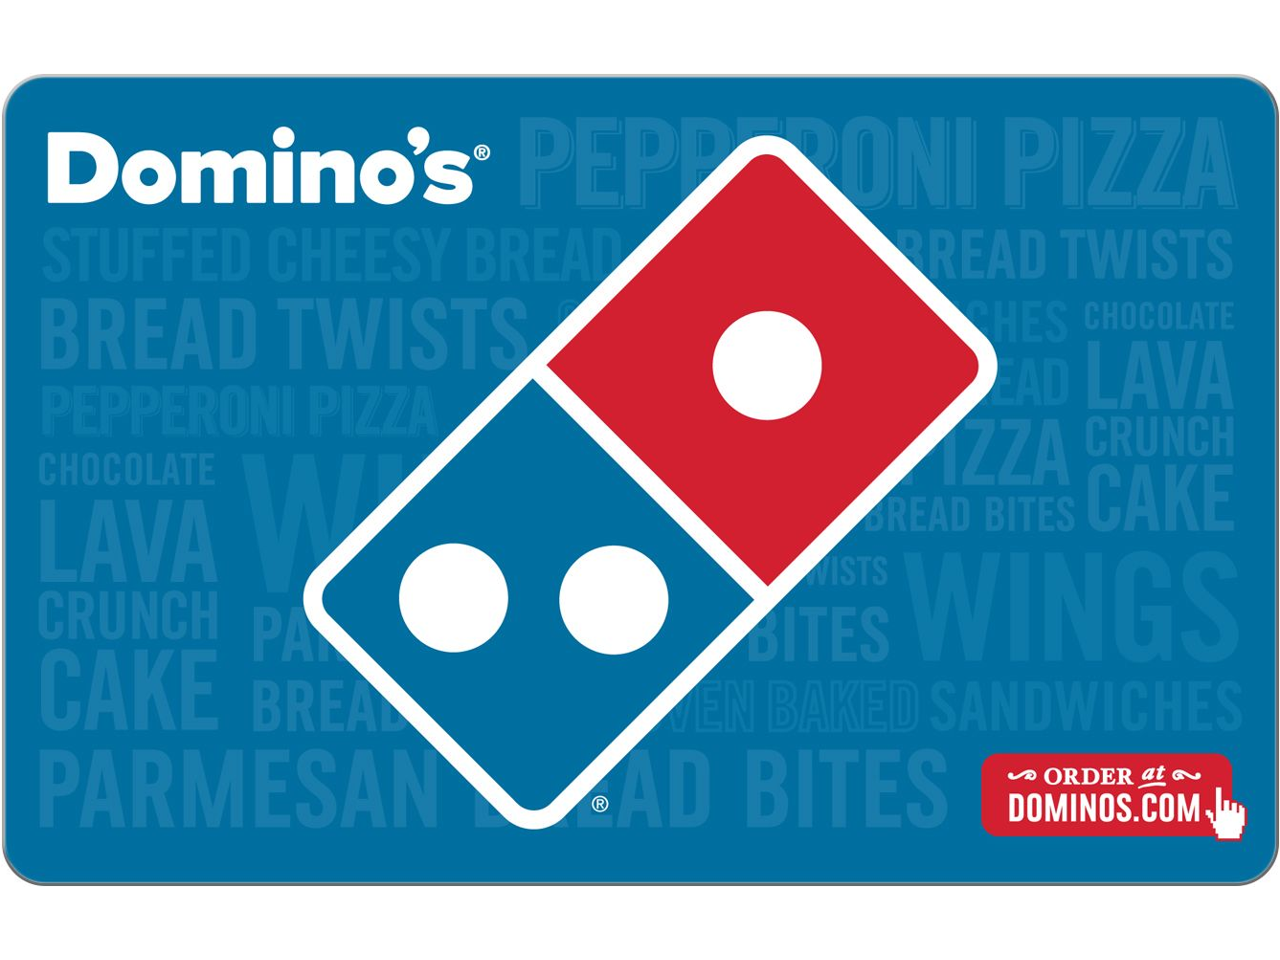 Domino's $25 Gift Card (Email Delivery) + $5 GC @Newegg